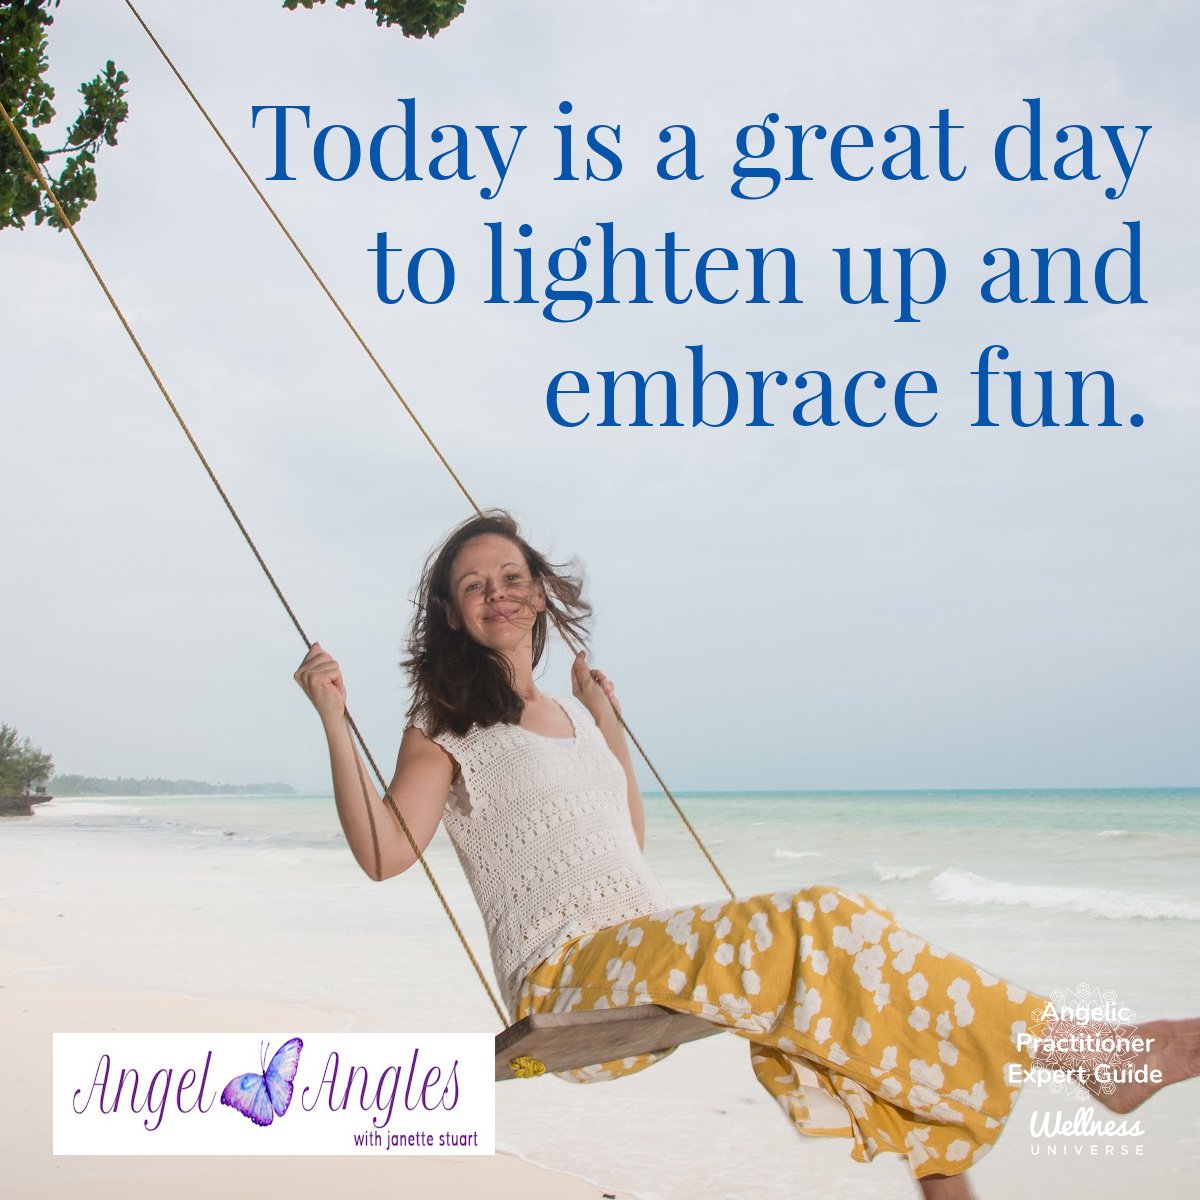 Hello and welcome to your Angel Affirmation for Fri. Apr. 19, 2024. 

Today is a great day to lighten up and embrace fun. Yes, amen and so it is. 

Blessings of love, joy, and peace.
Love,
Janette 
.
.
#WUVIP #WUWorldChanger #AngelAffirmations #fun #